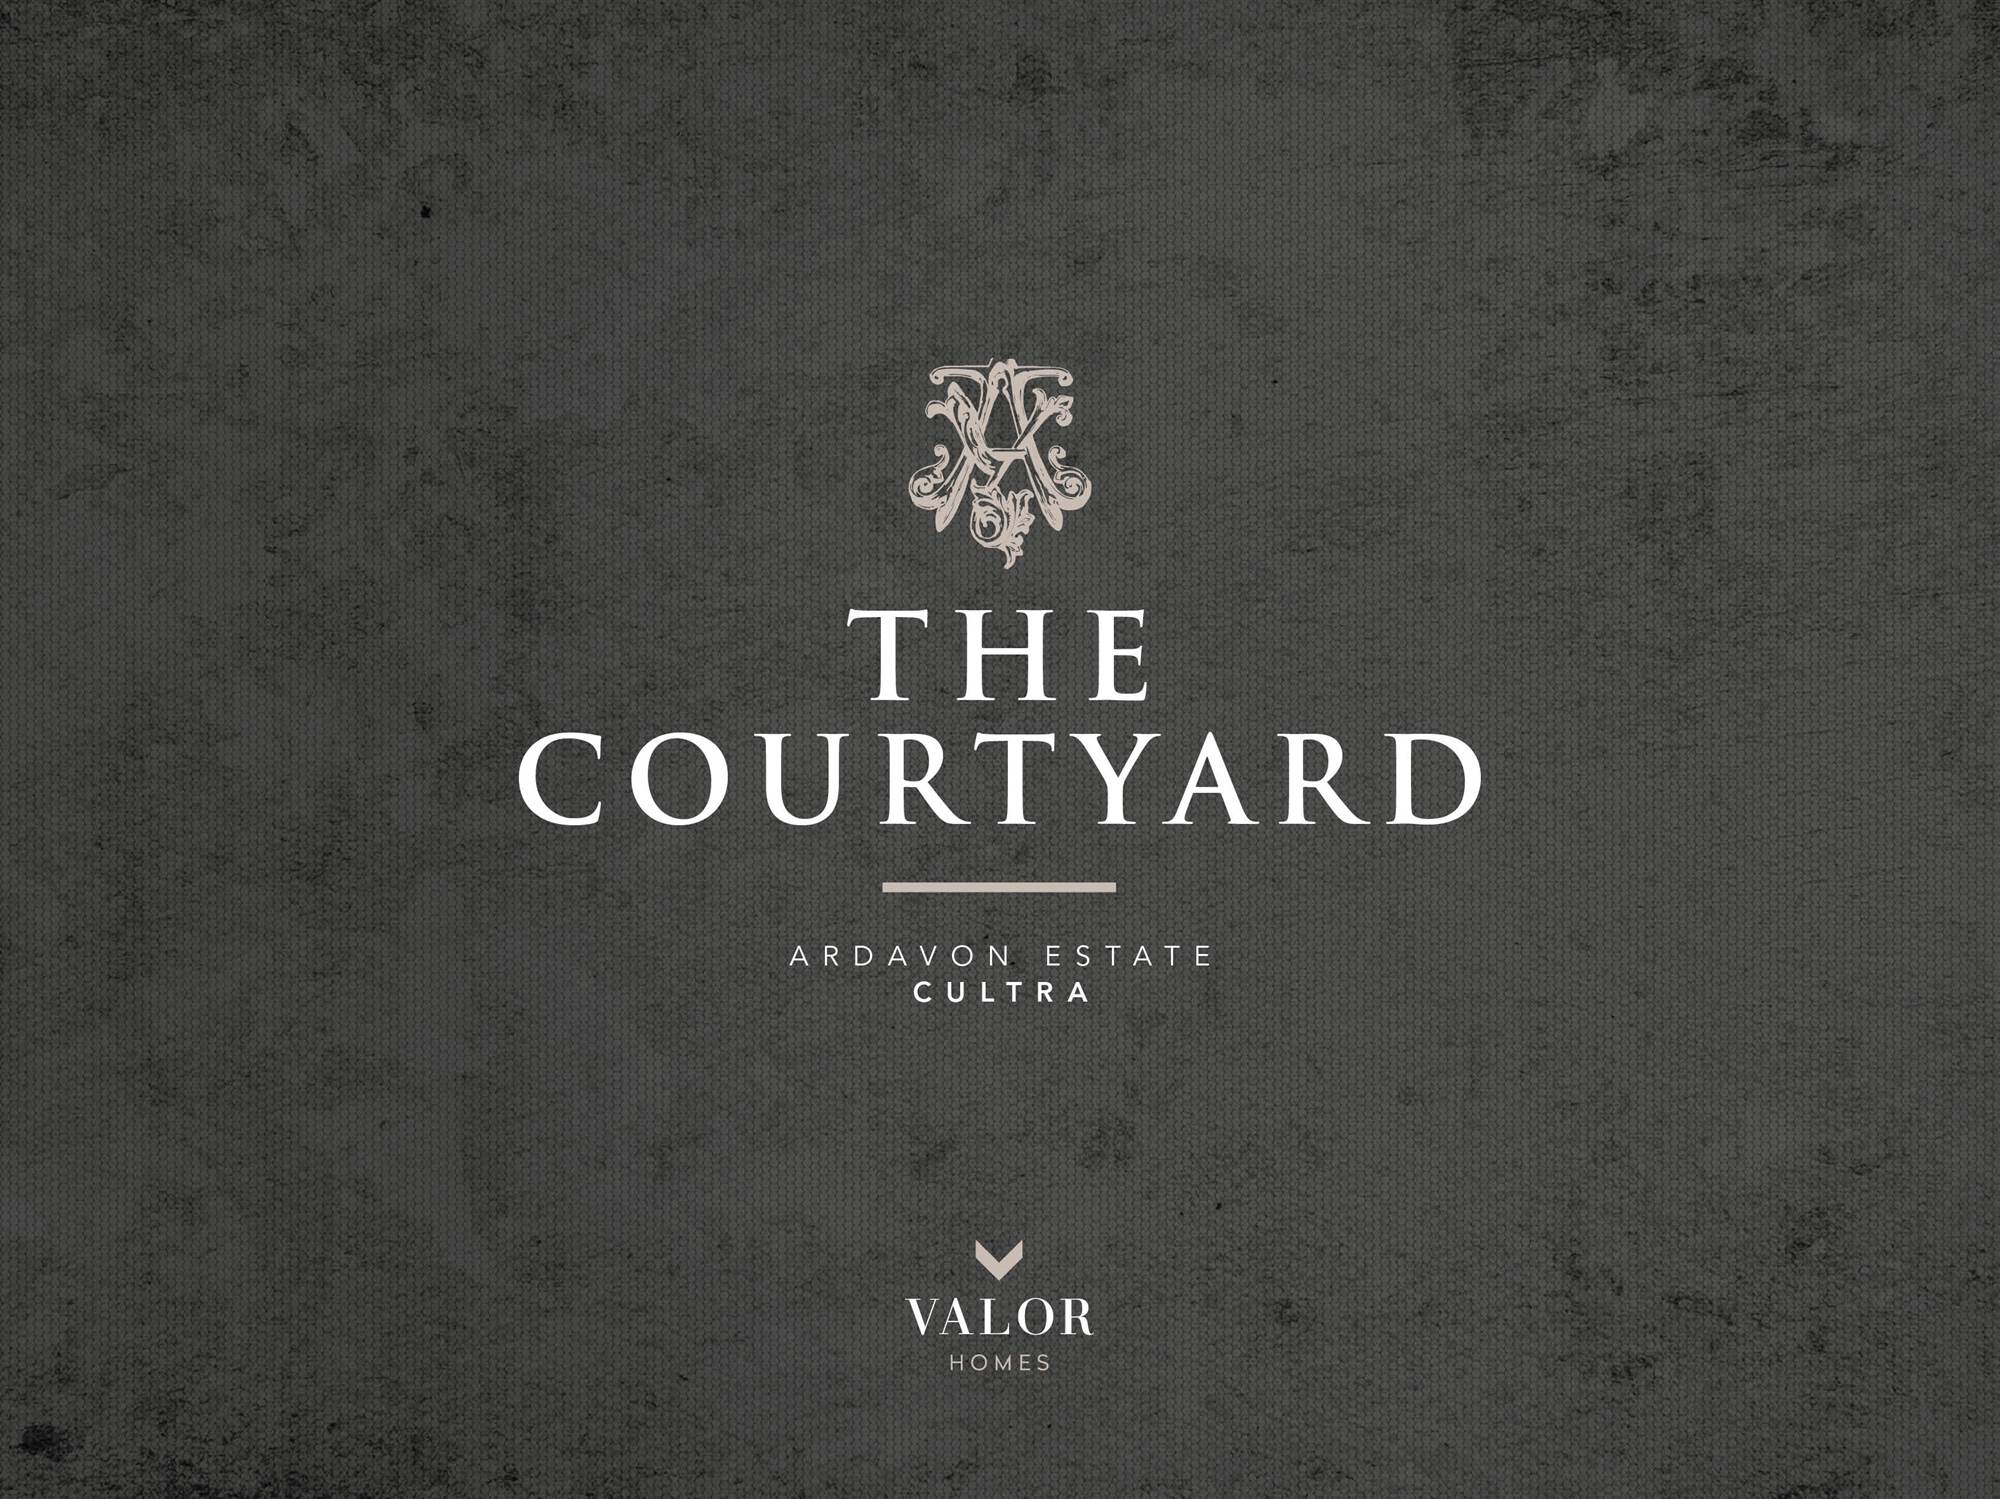 7 The Courtyard